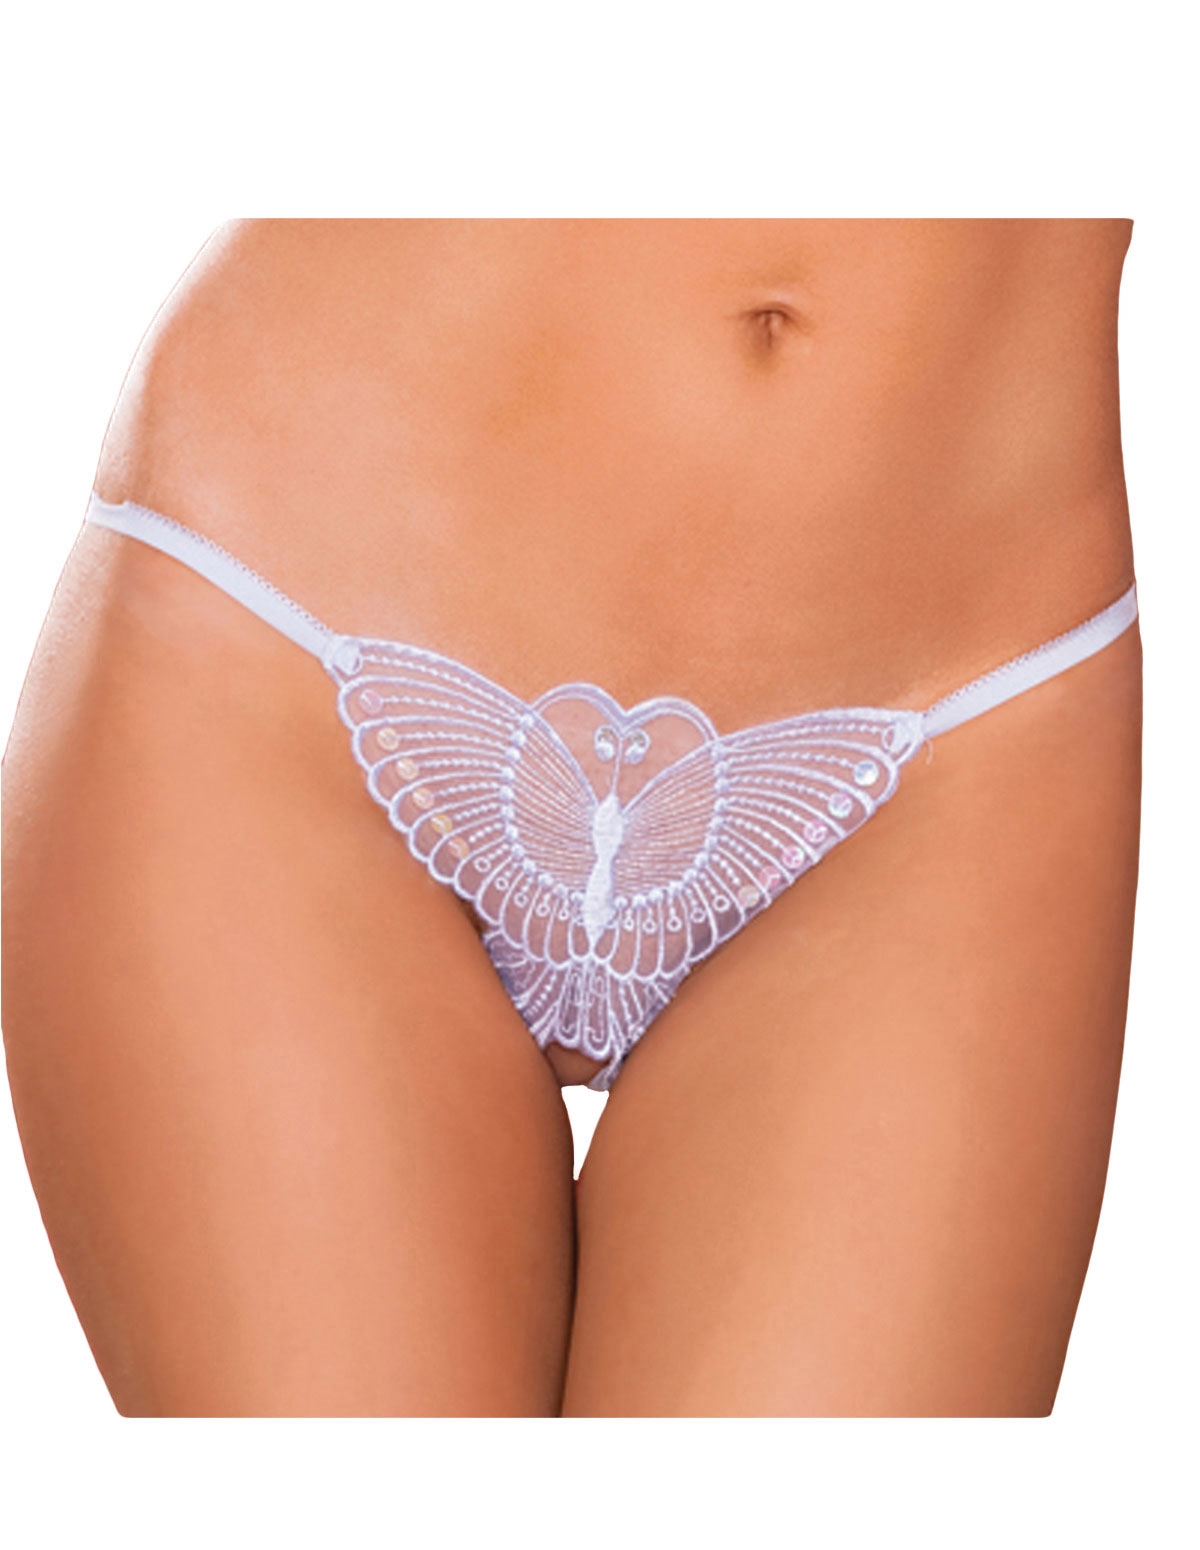 alternate image for Madame Butterfly Crotchless G-String